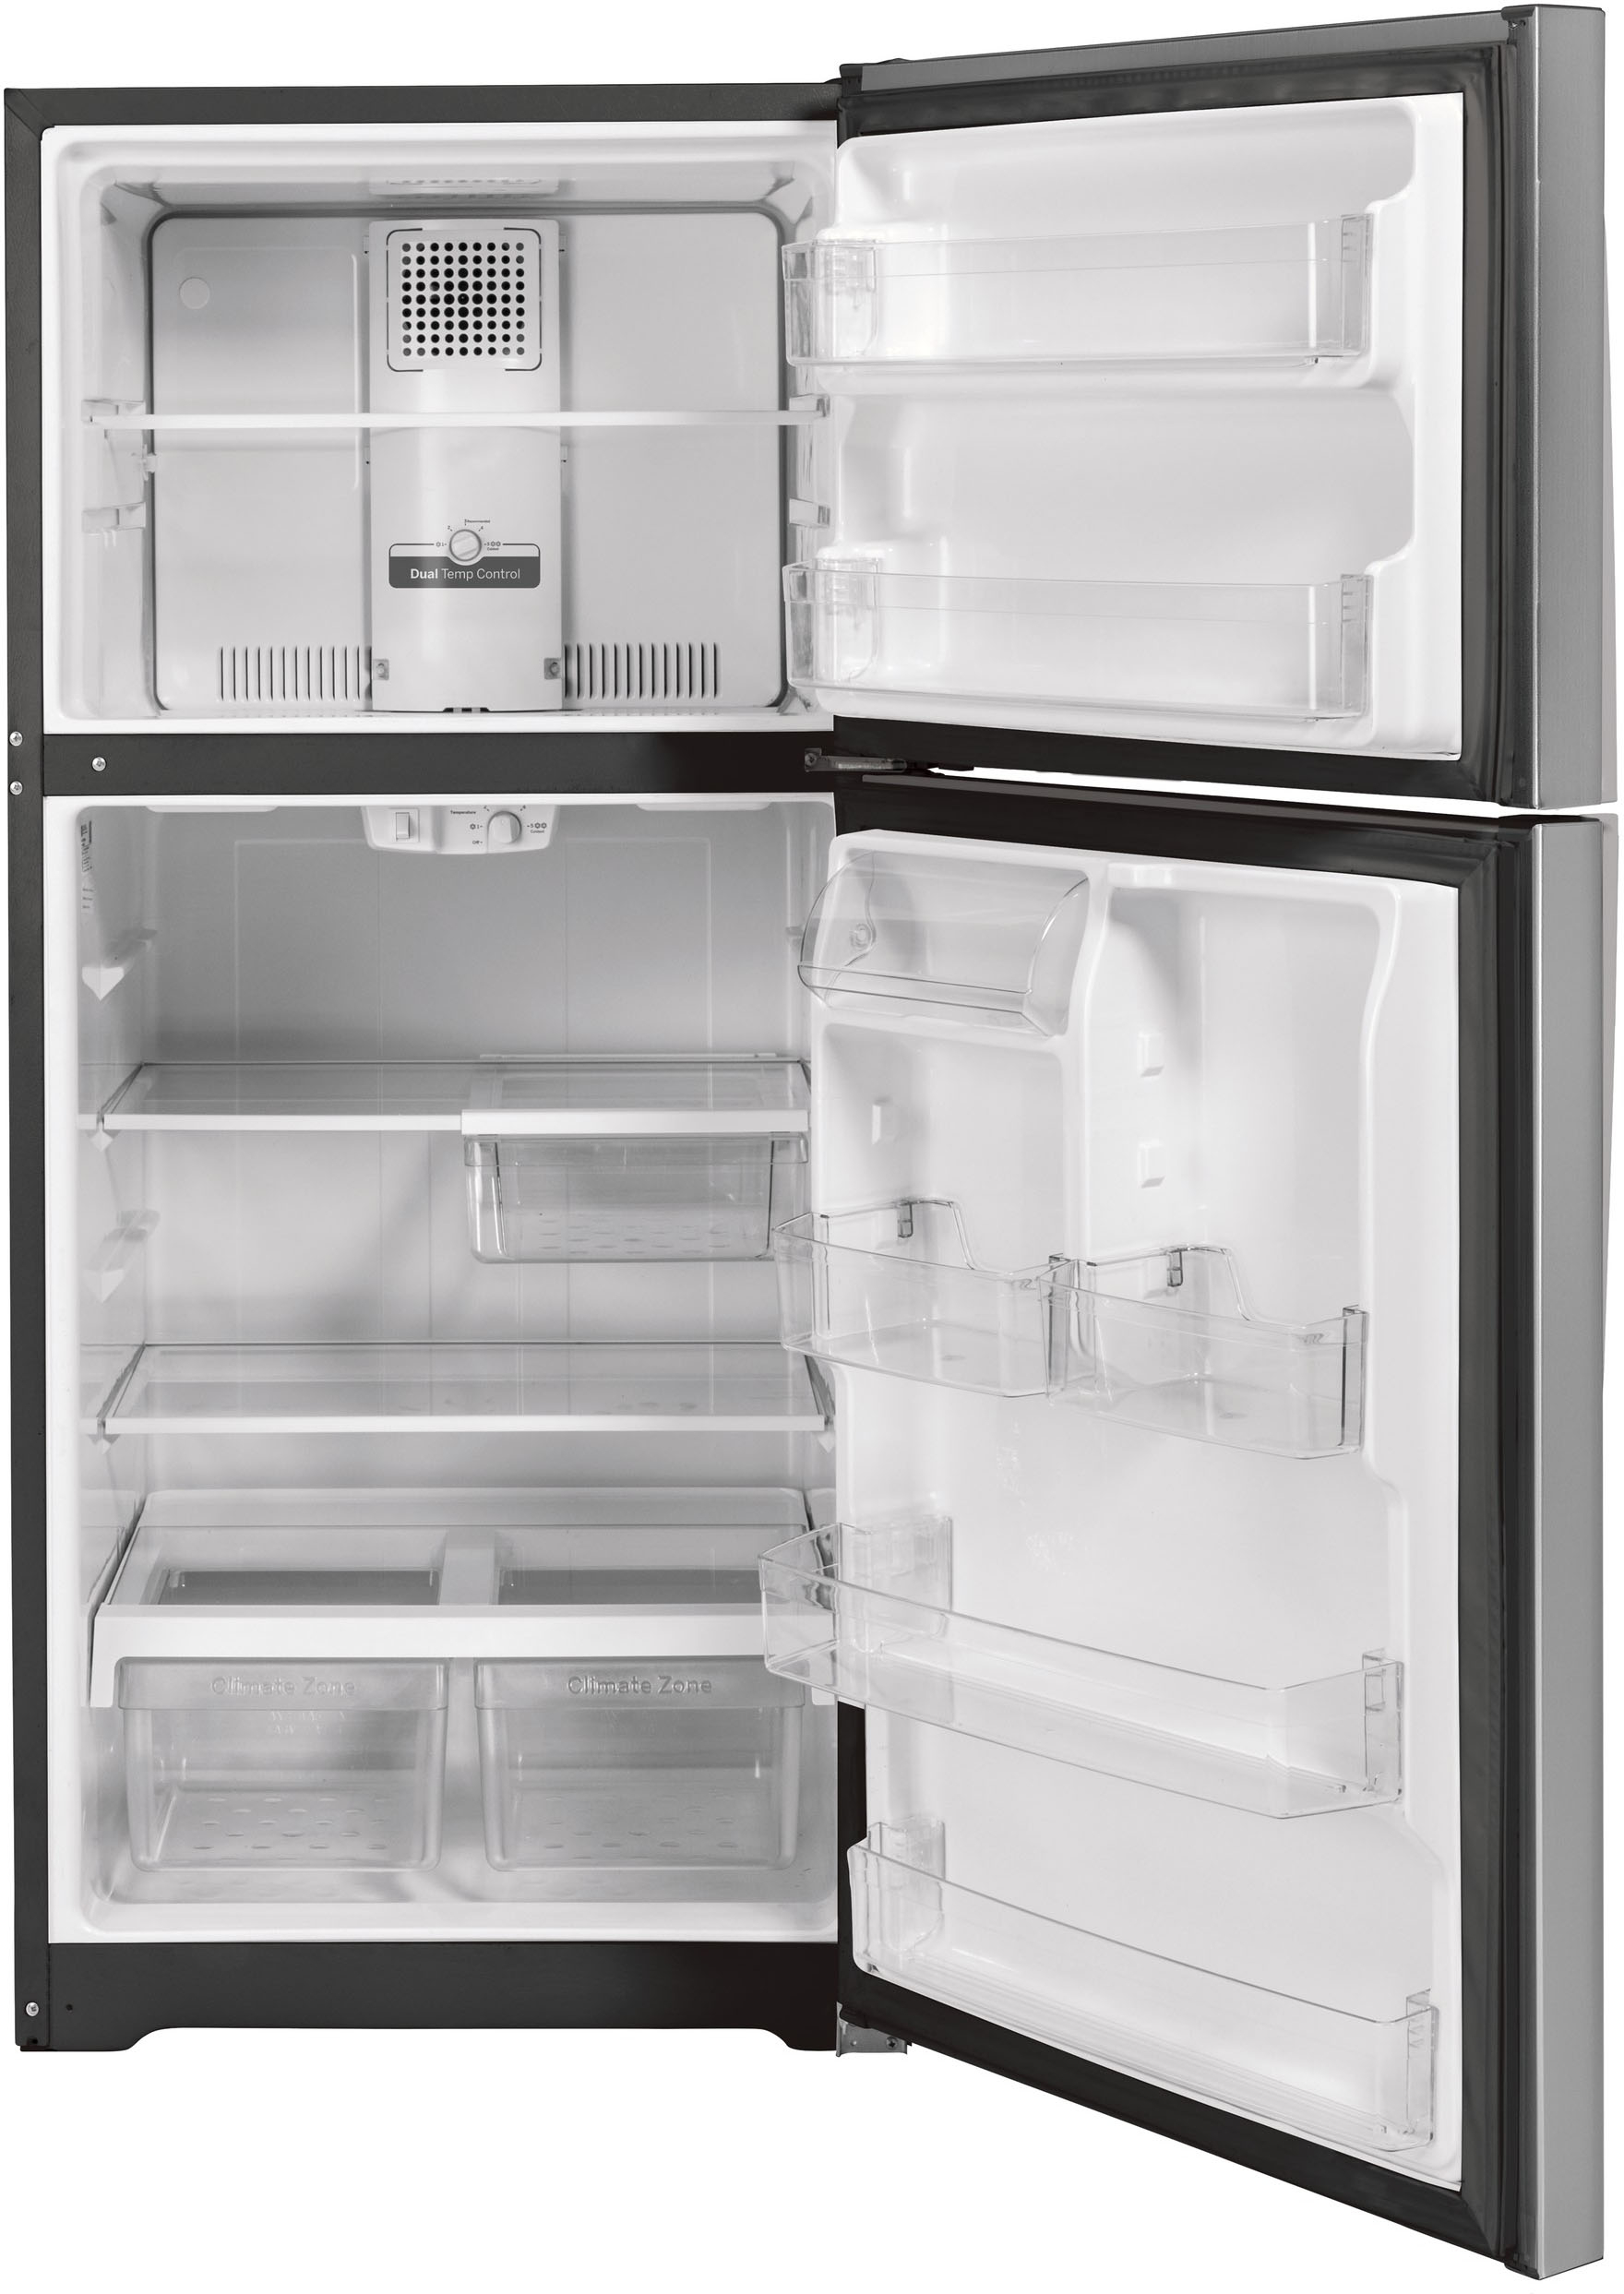 The Best Garage Refrigerator Models - Reviews, Features, Prices